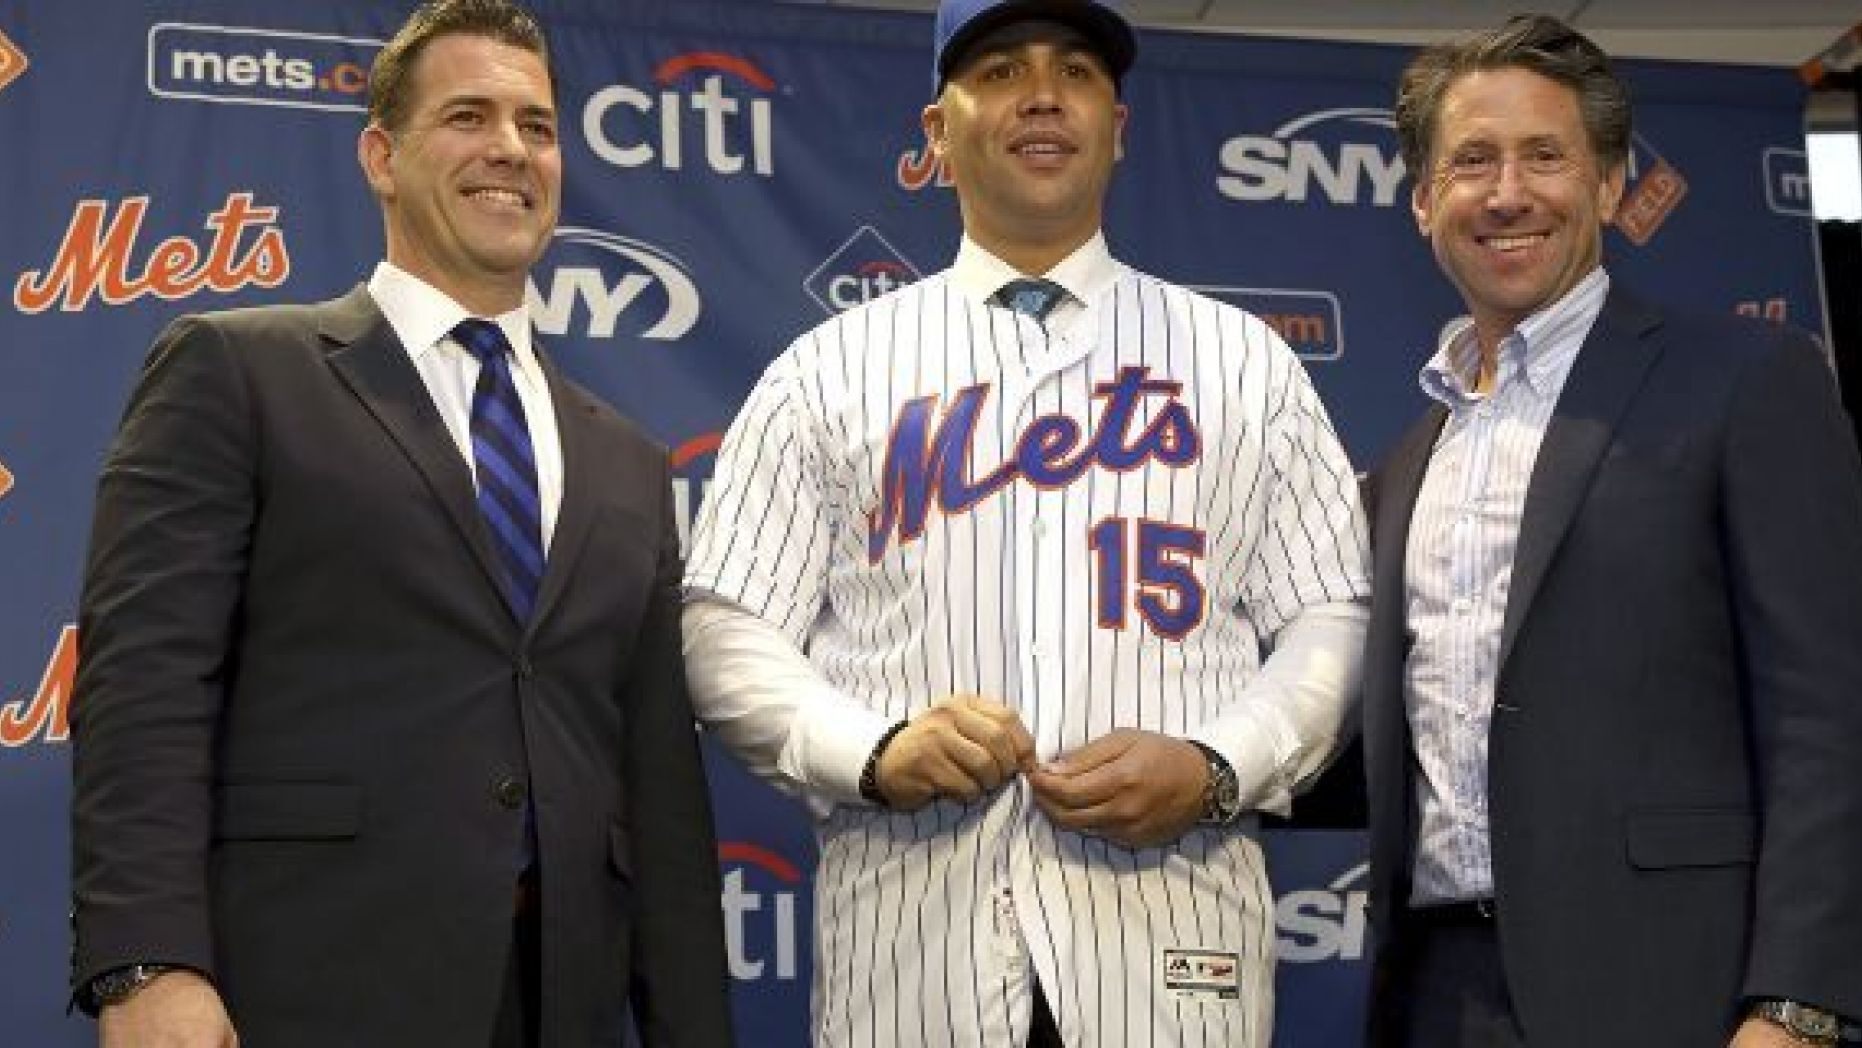 With the real possibility the Mets hire Carlos Beltran as manager